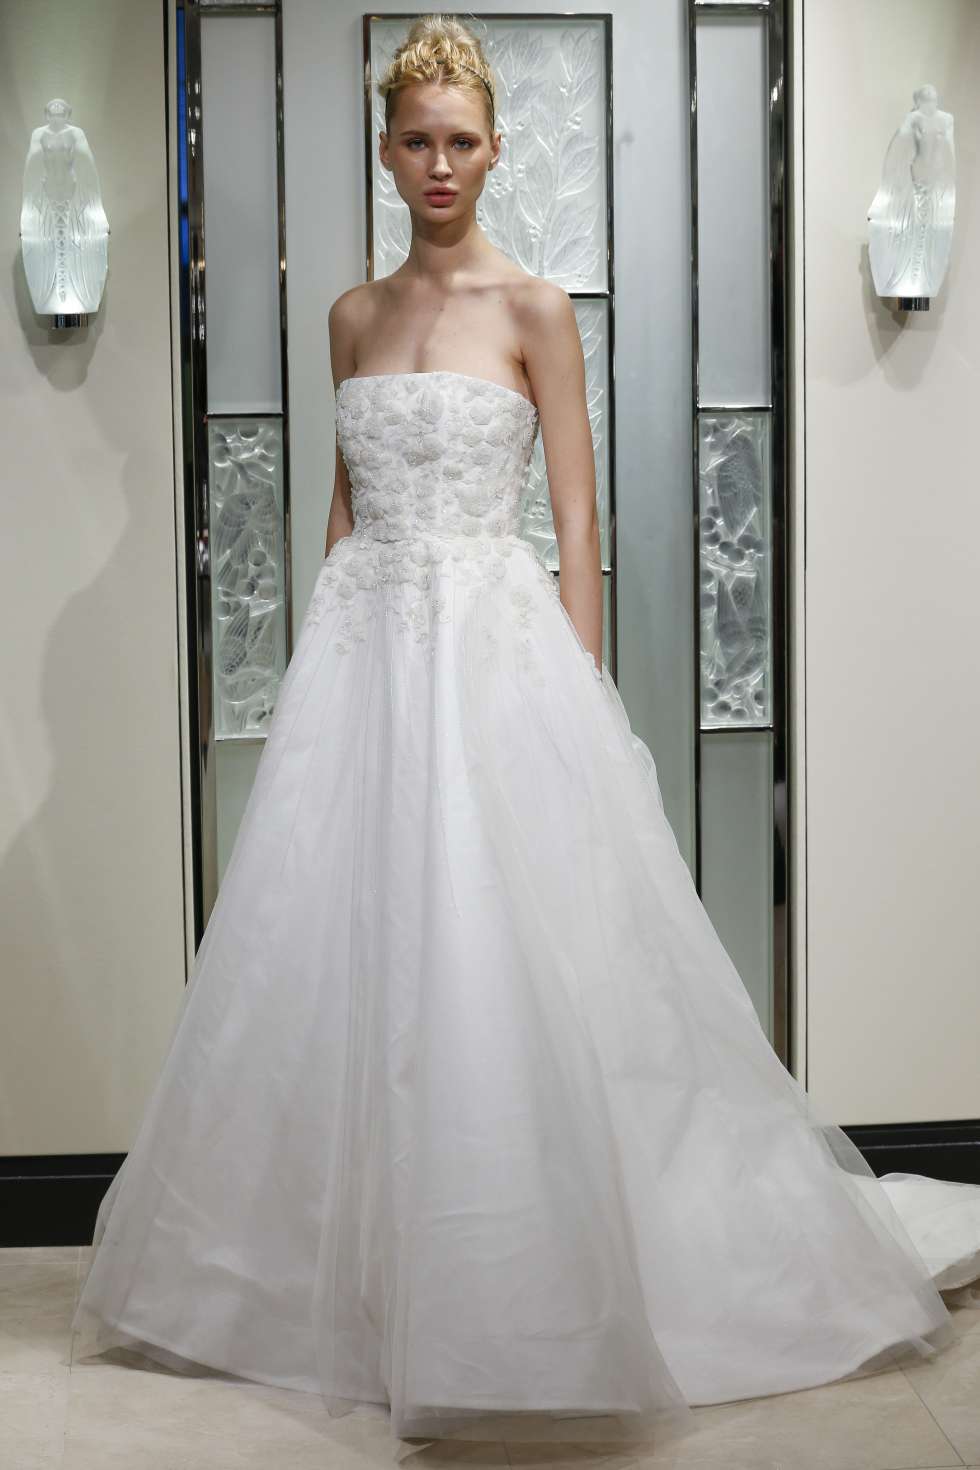 Gracy Accad 2020 Spring Wedding Dress Collection